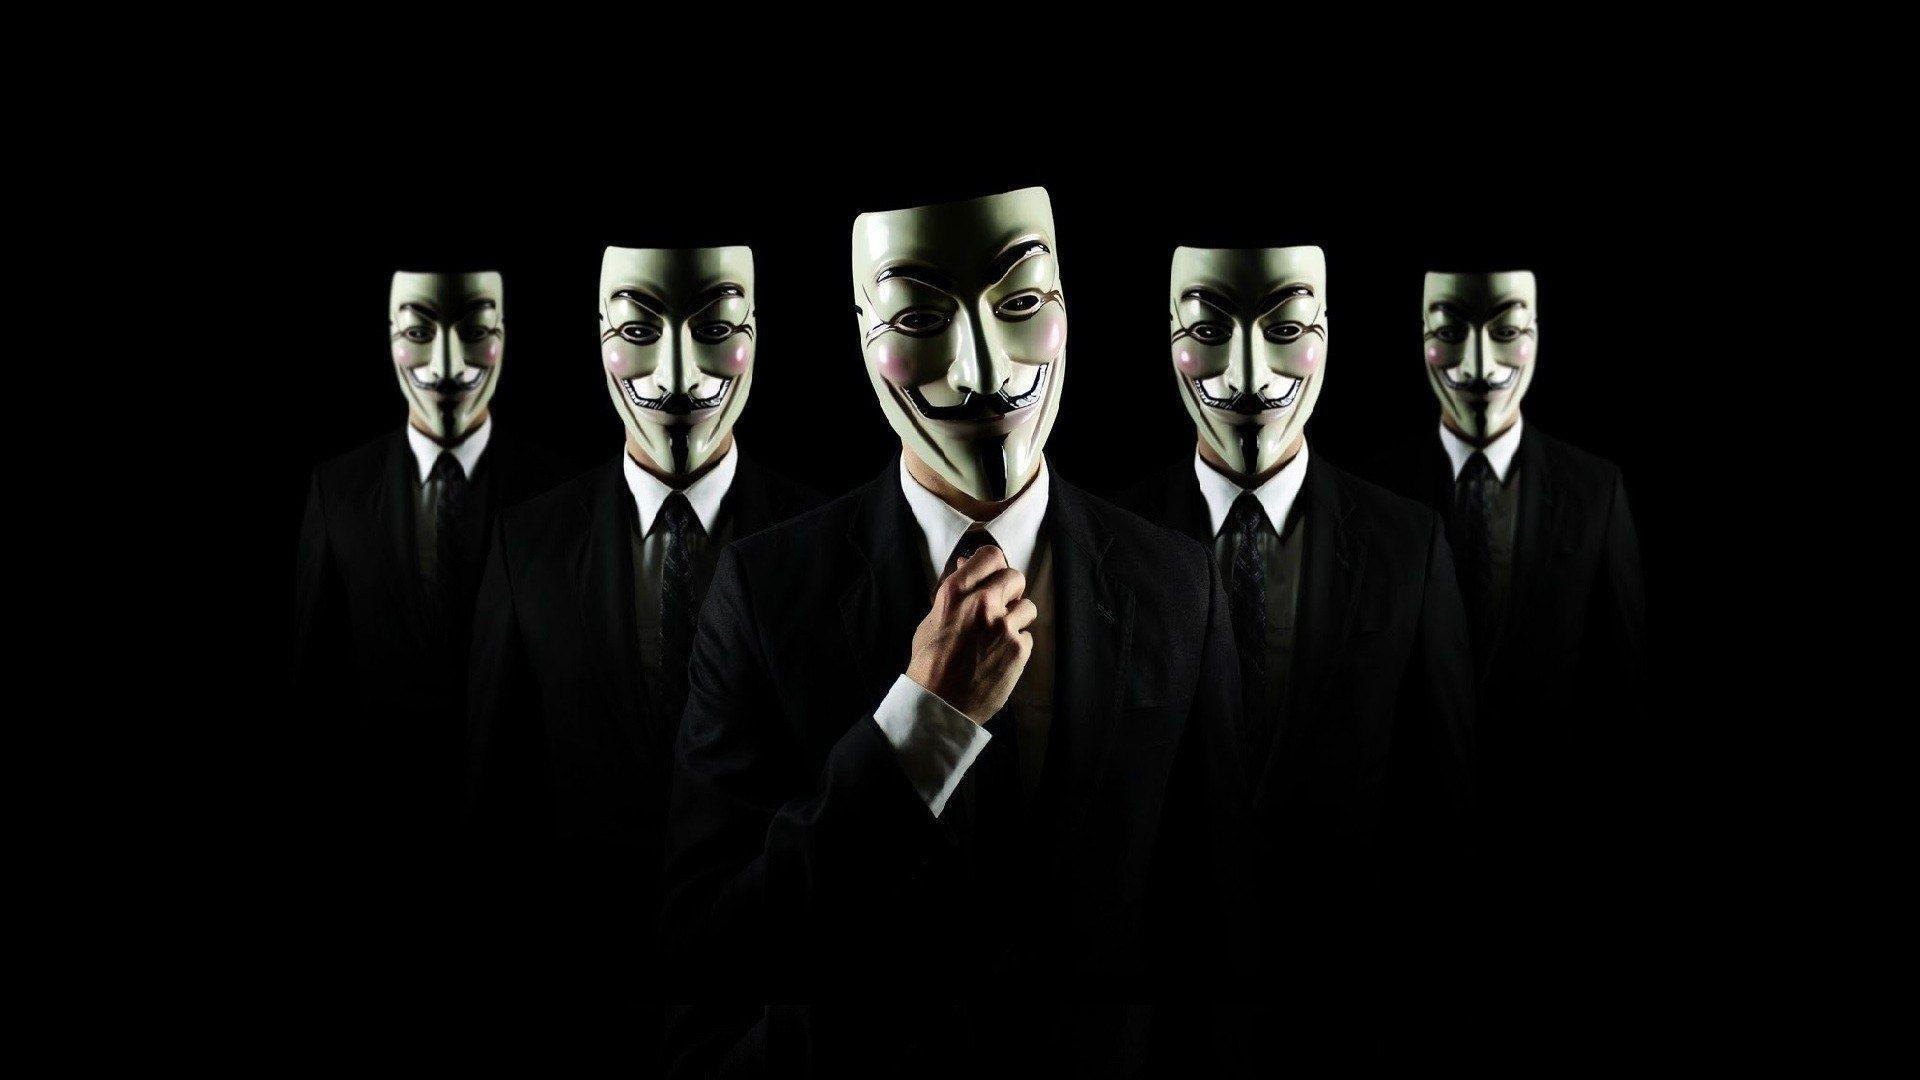 Anonymous Wallpaper, Find best latest Anonymous Wallpaper in HD